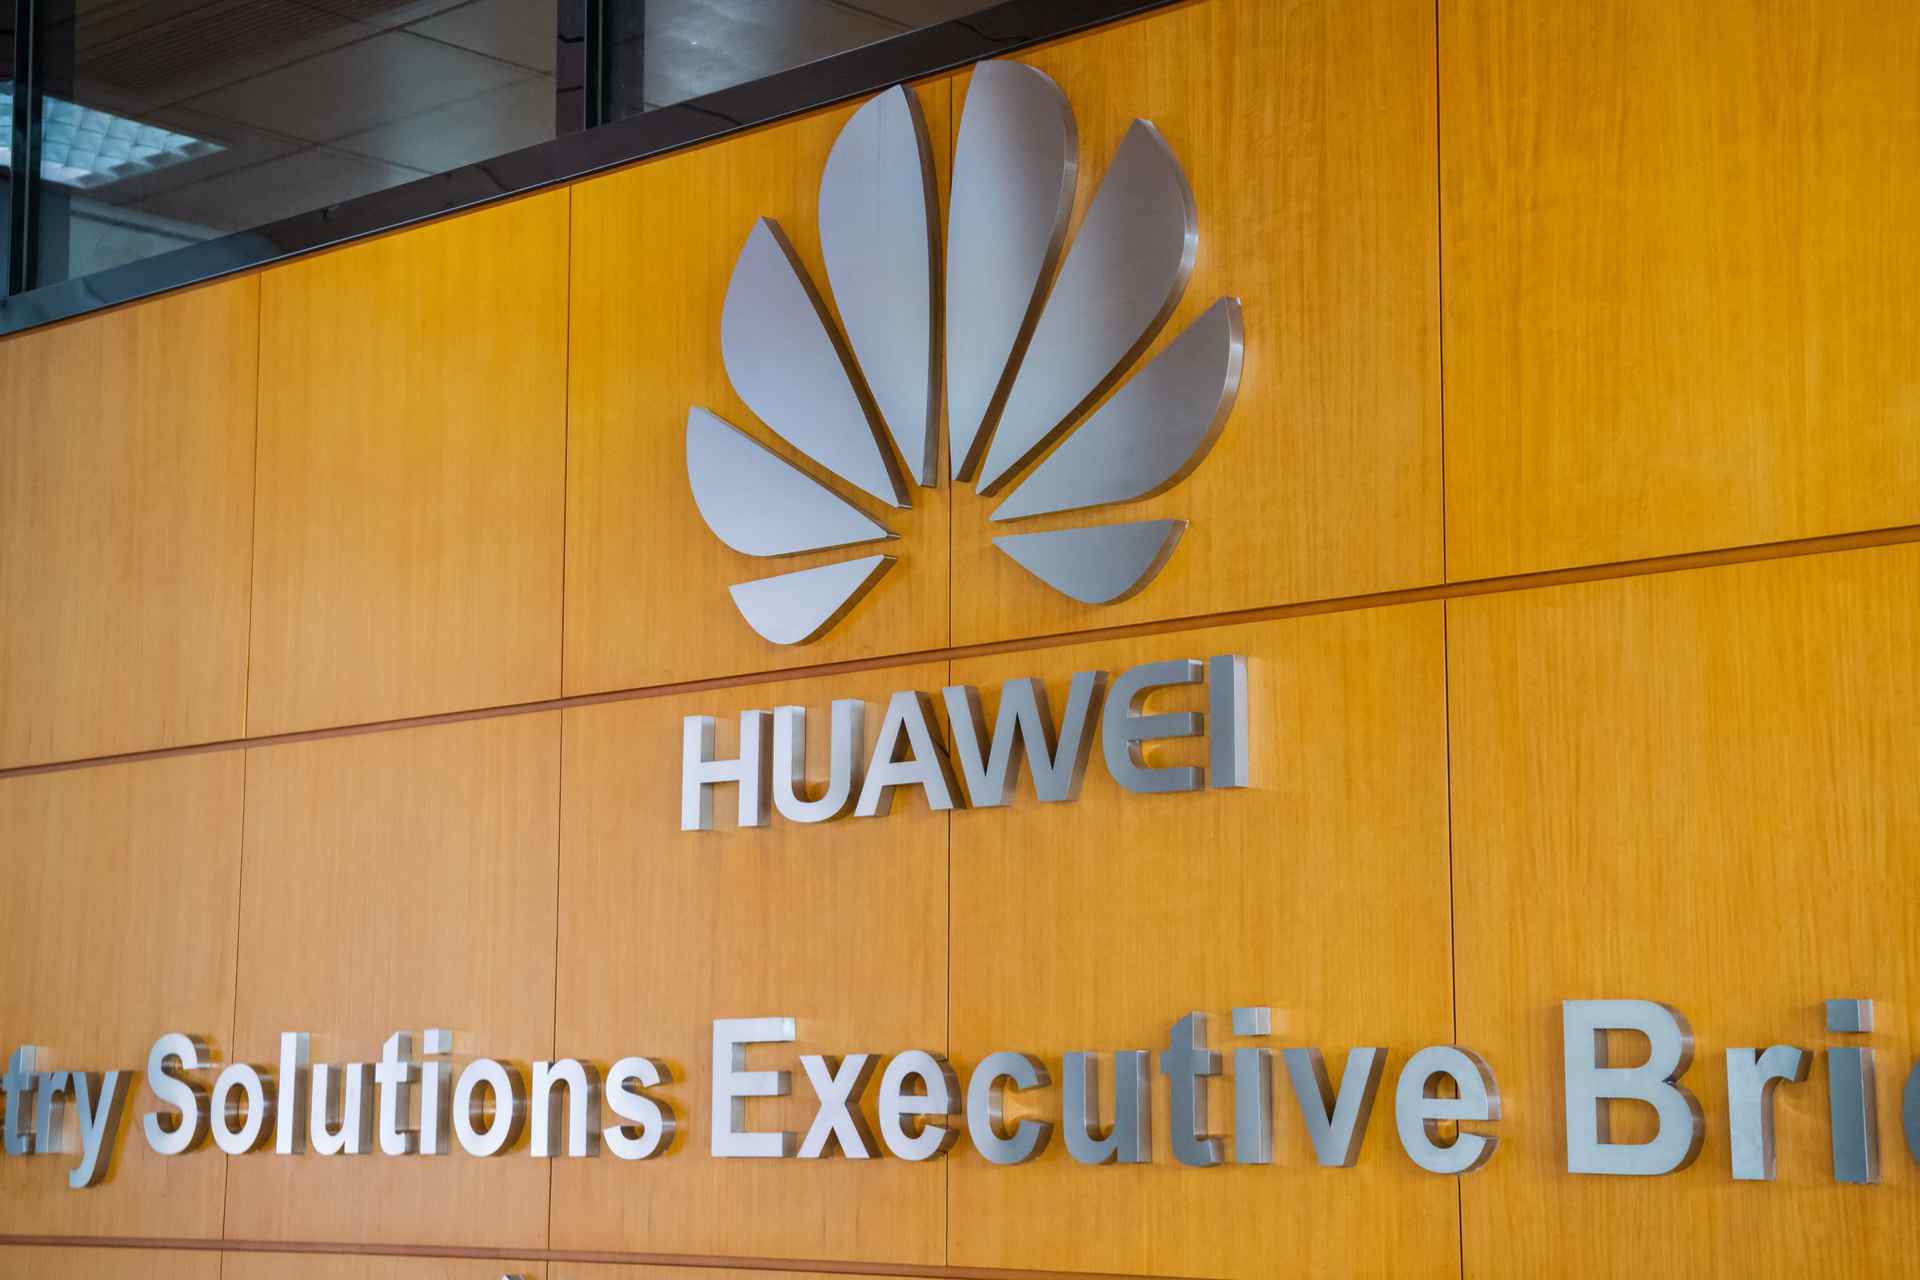 Modest risk rebound on partial delay of Huawei ban